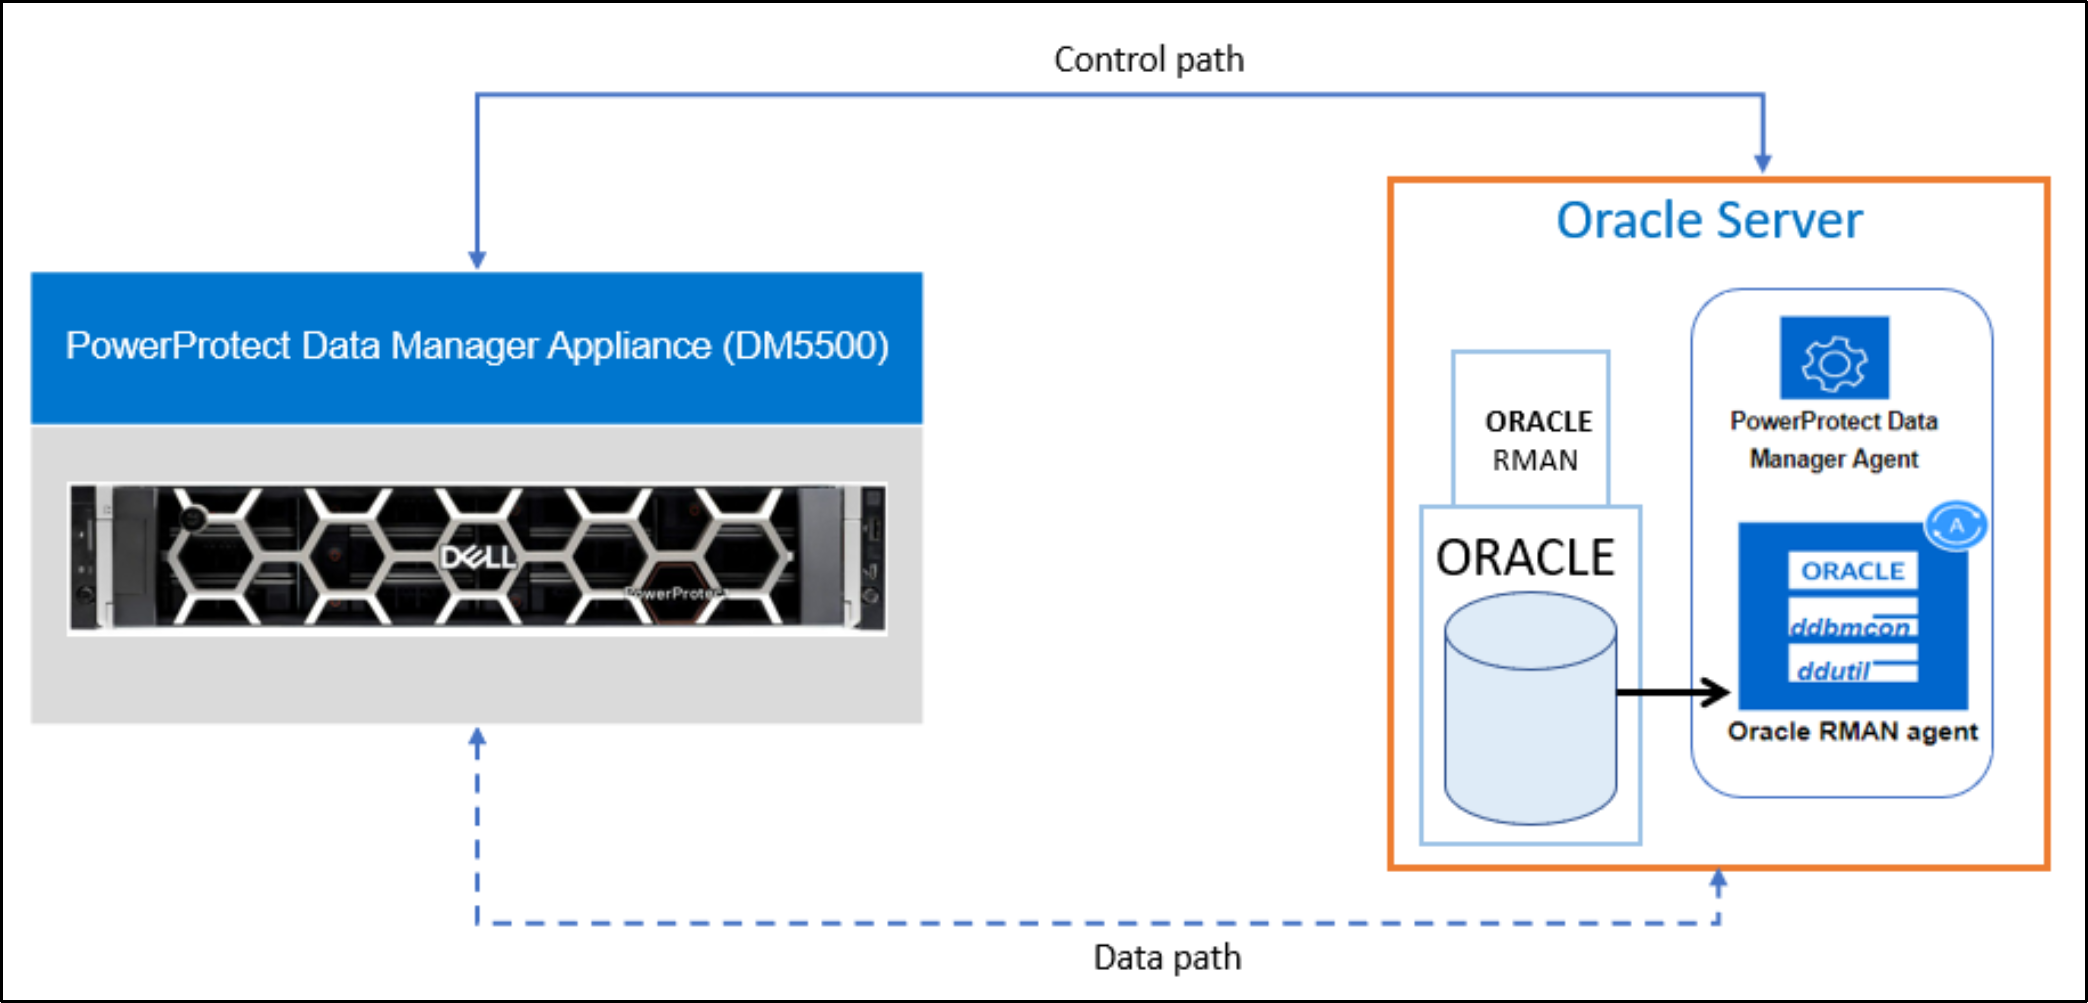 The image shows oracle database protection with the Data Manager Appliance